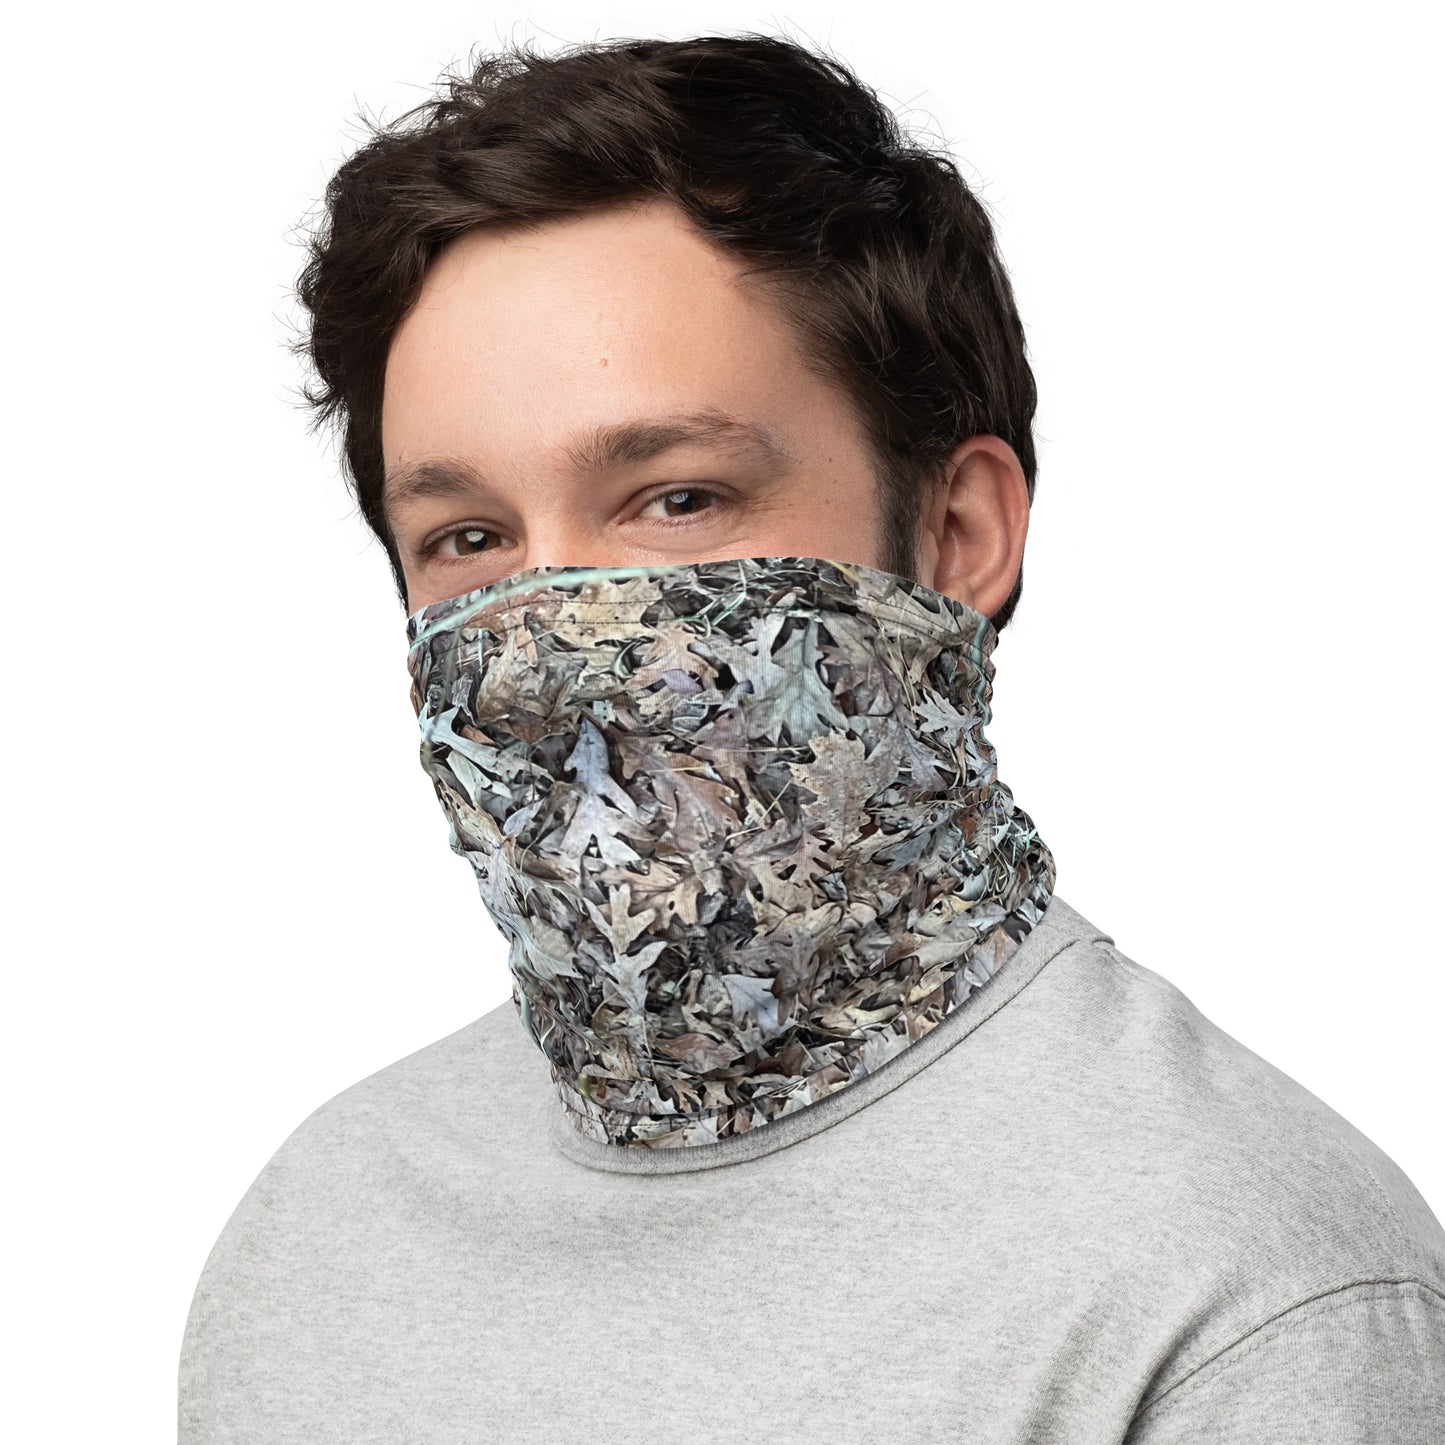 Southern Cameaux Ground Cover Neck Gaiter